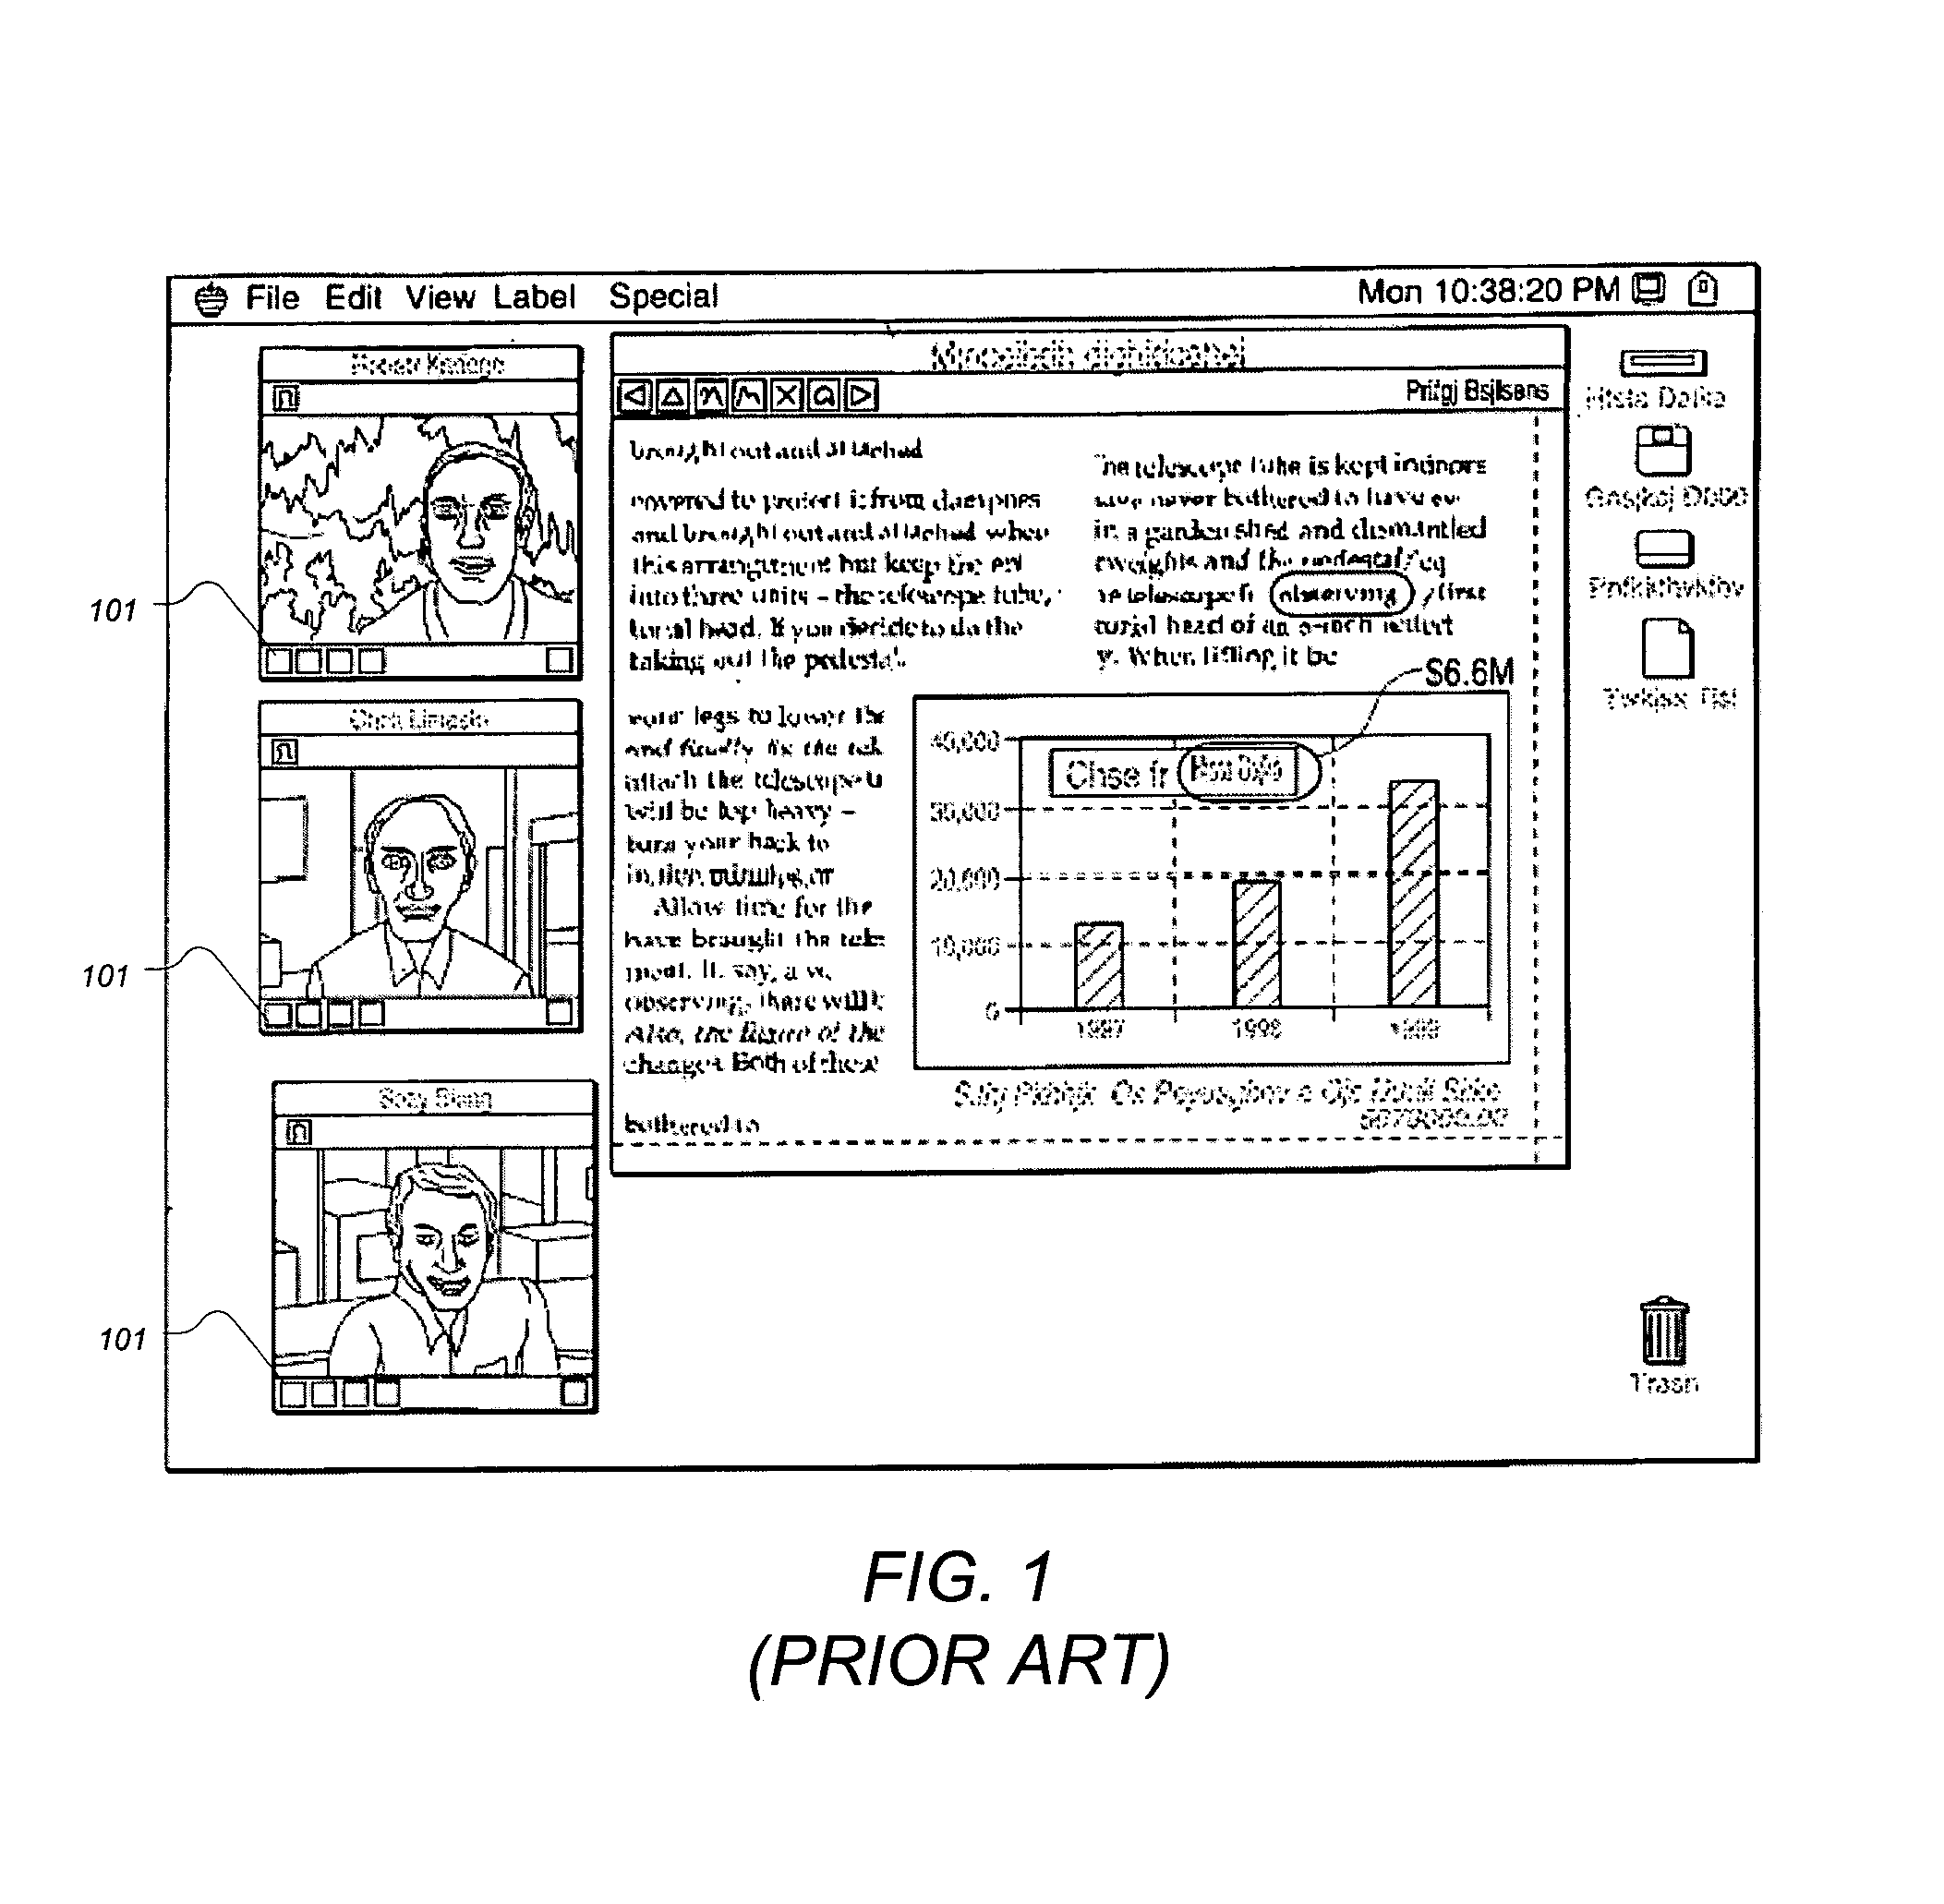 Multi-way video conferencing user interface